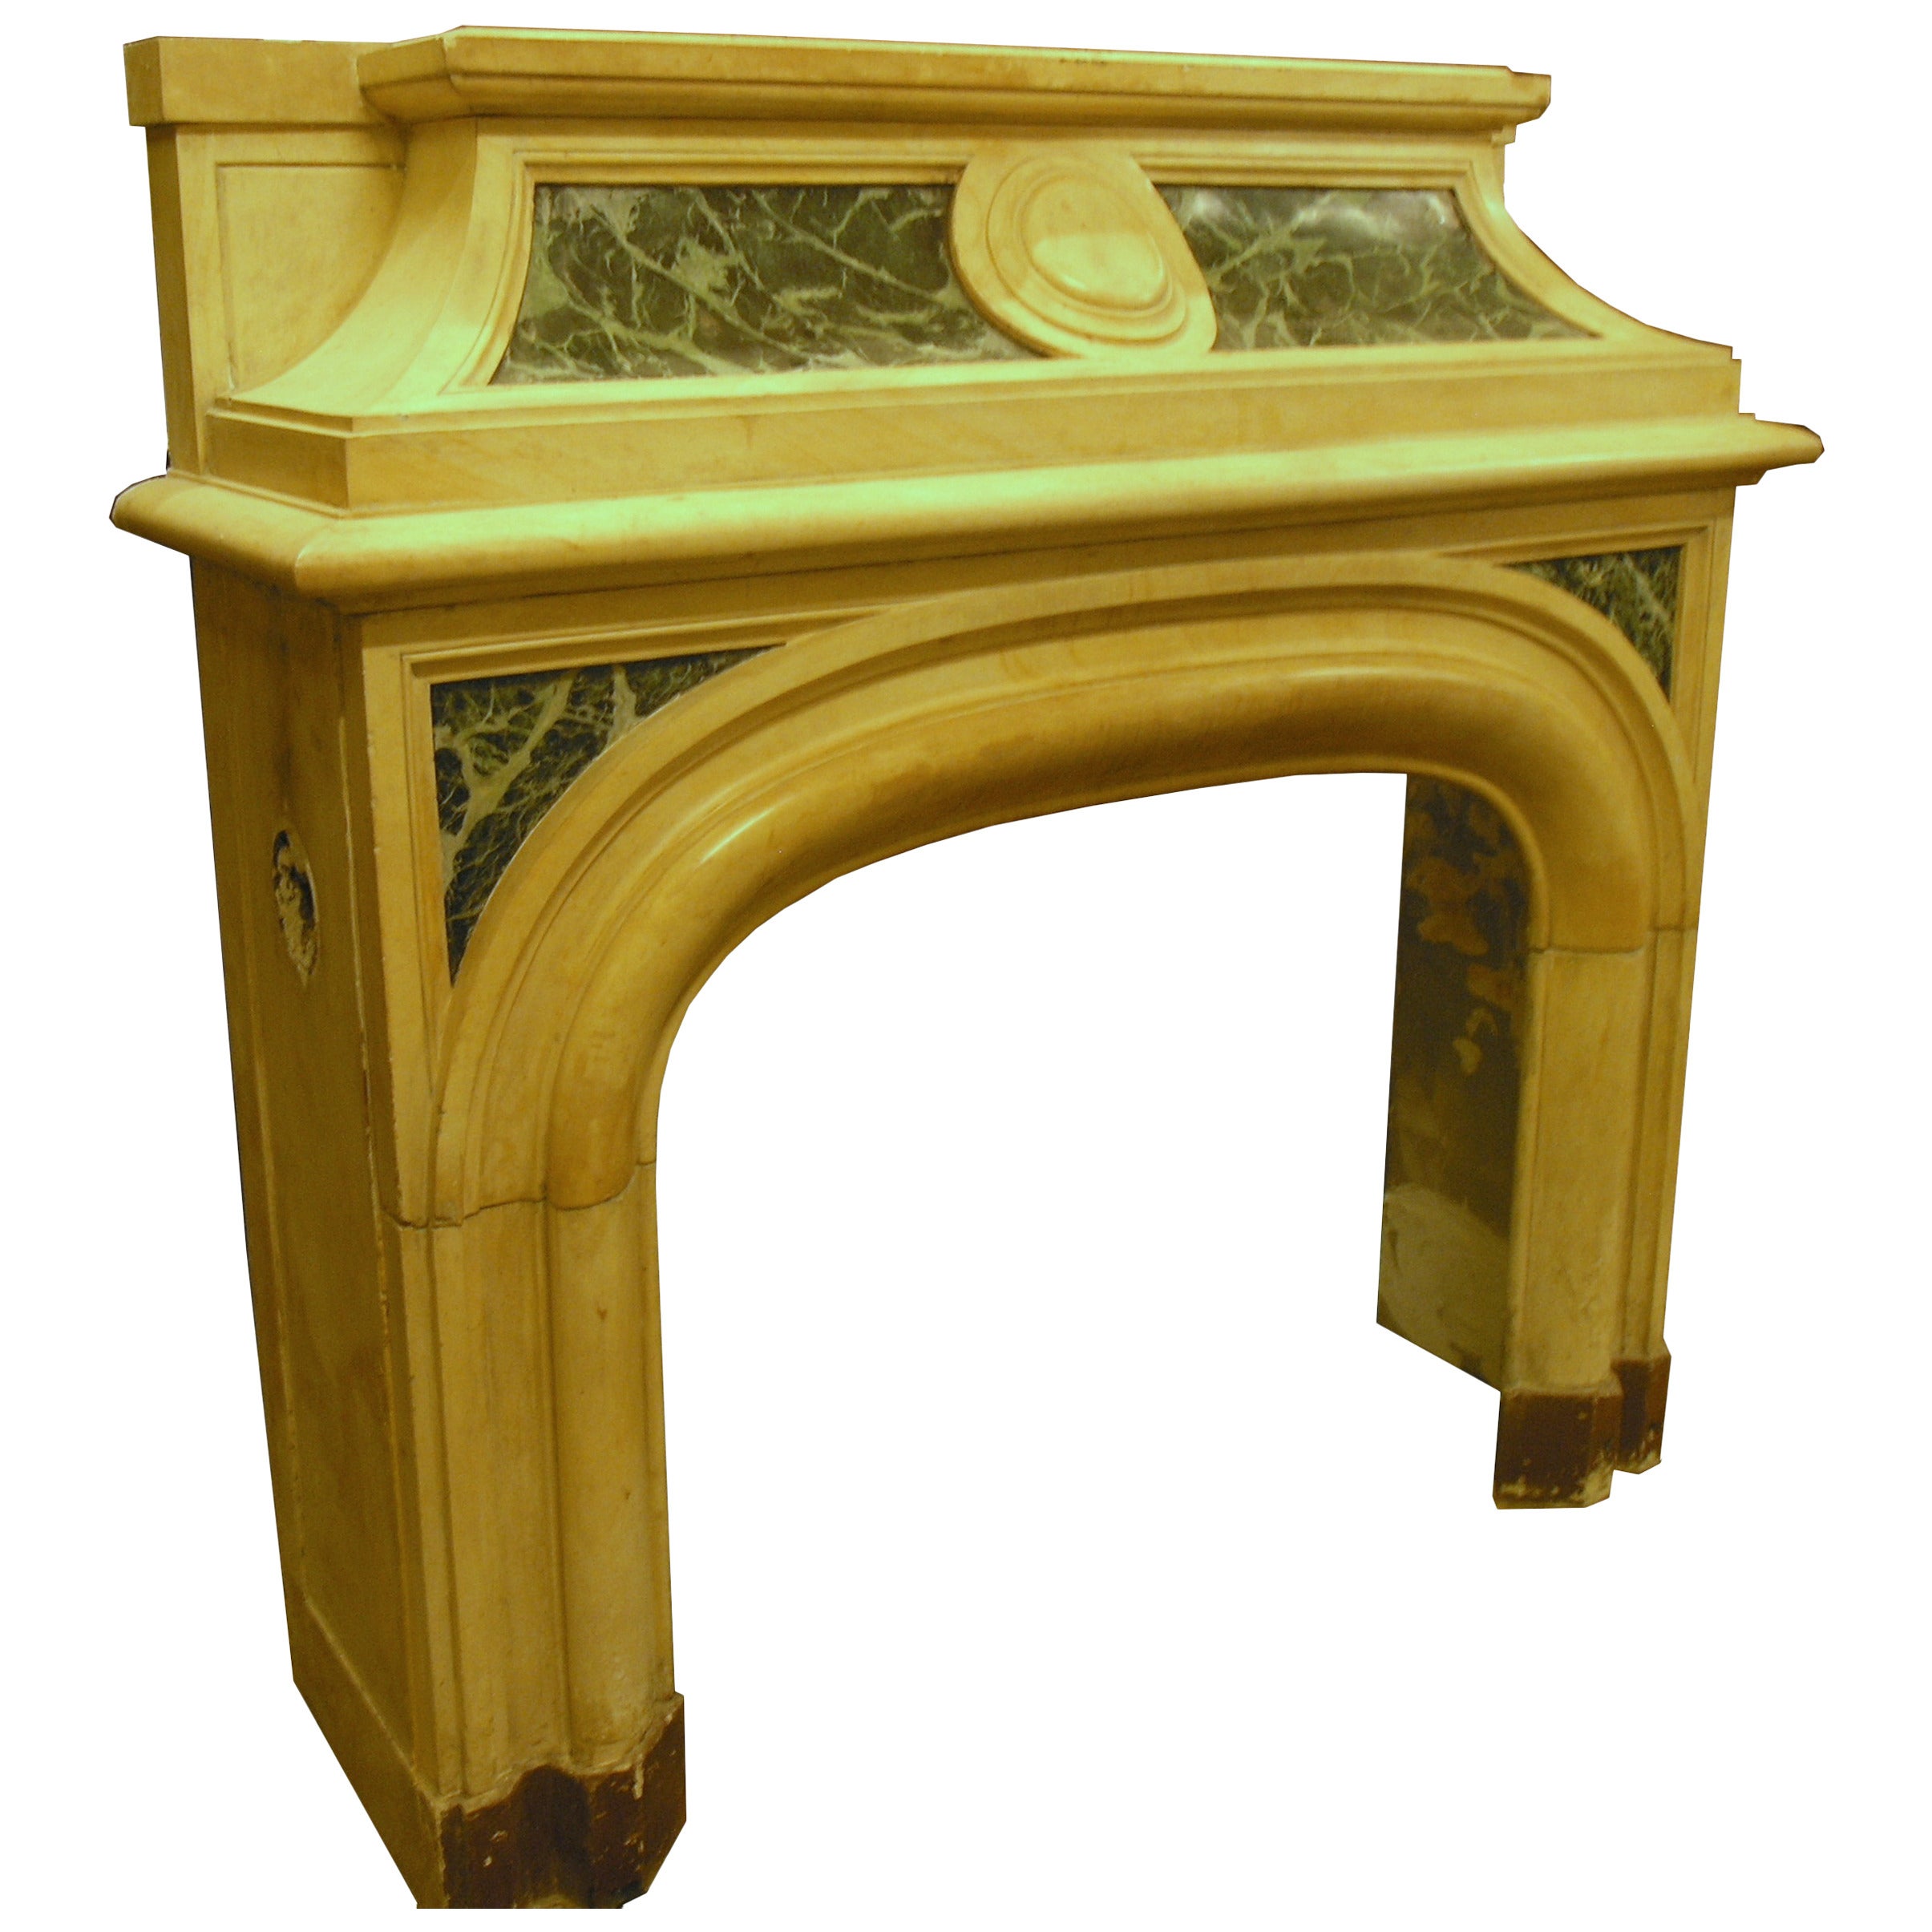 Antique Verde Alpi and Giallo Siena's Marble Fireplace Mantel